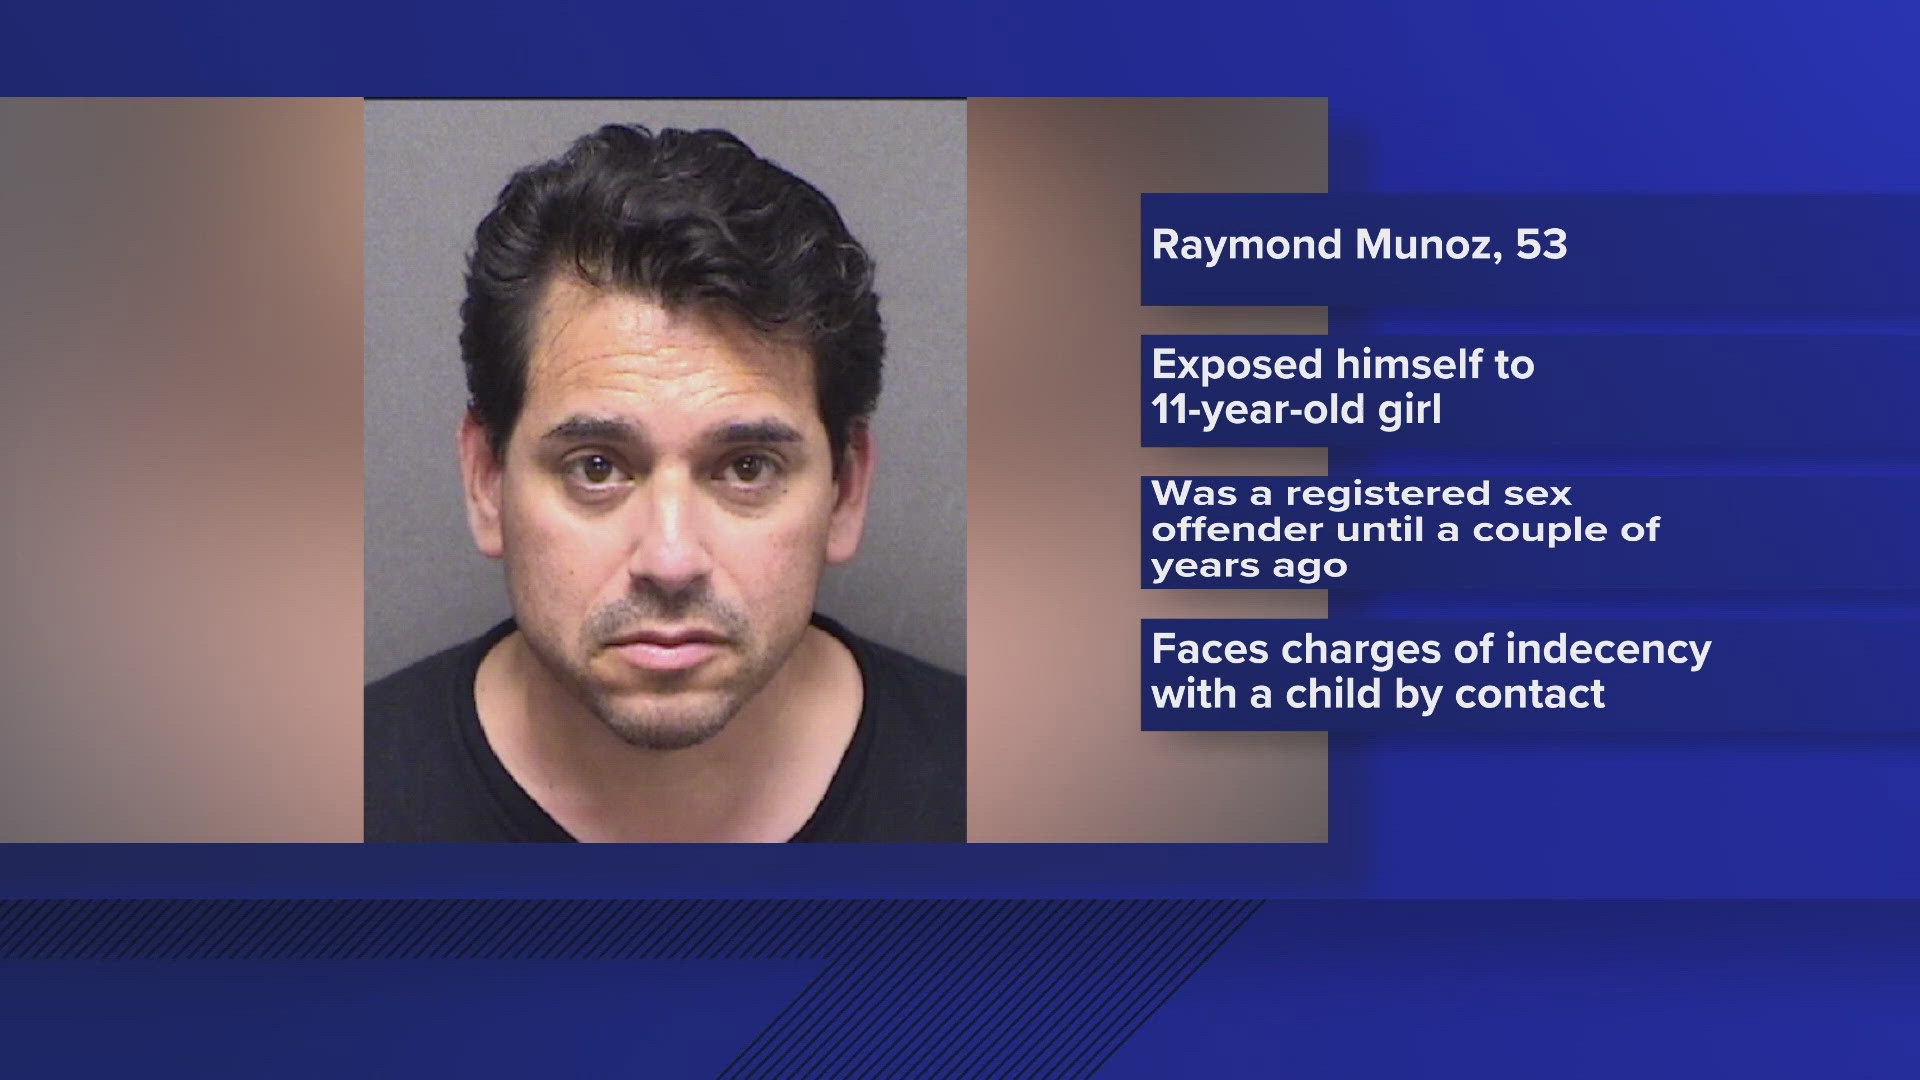 53-year-old Raymond Munoz exposed himself to an 11-year-old girl. He now faces charges of indecency with a child by contact.